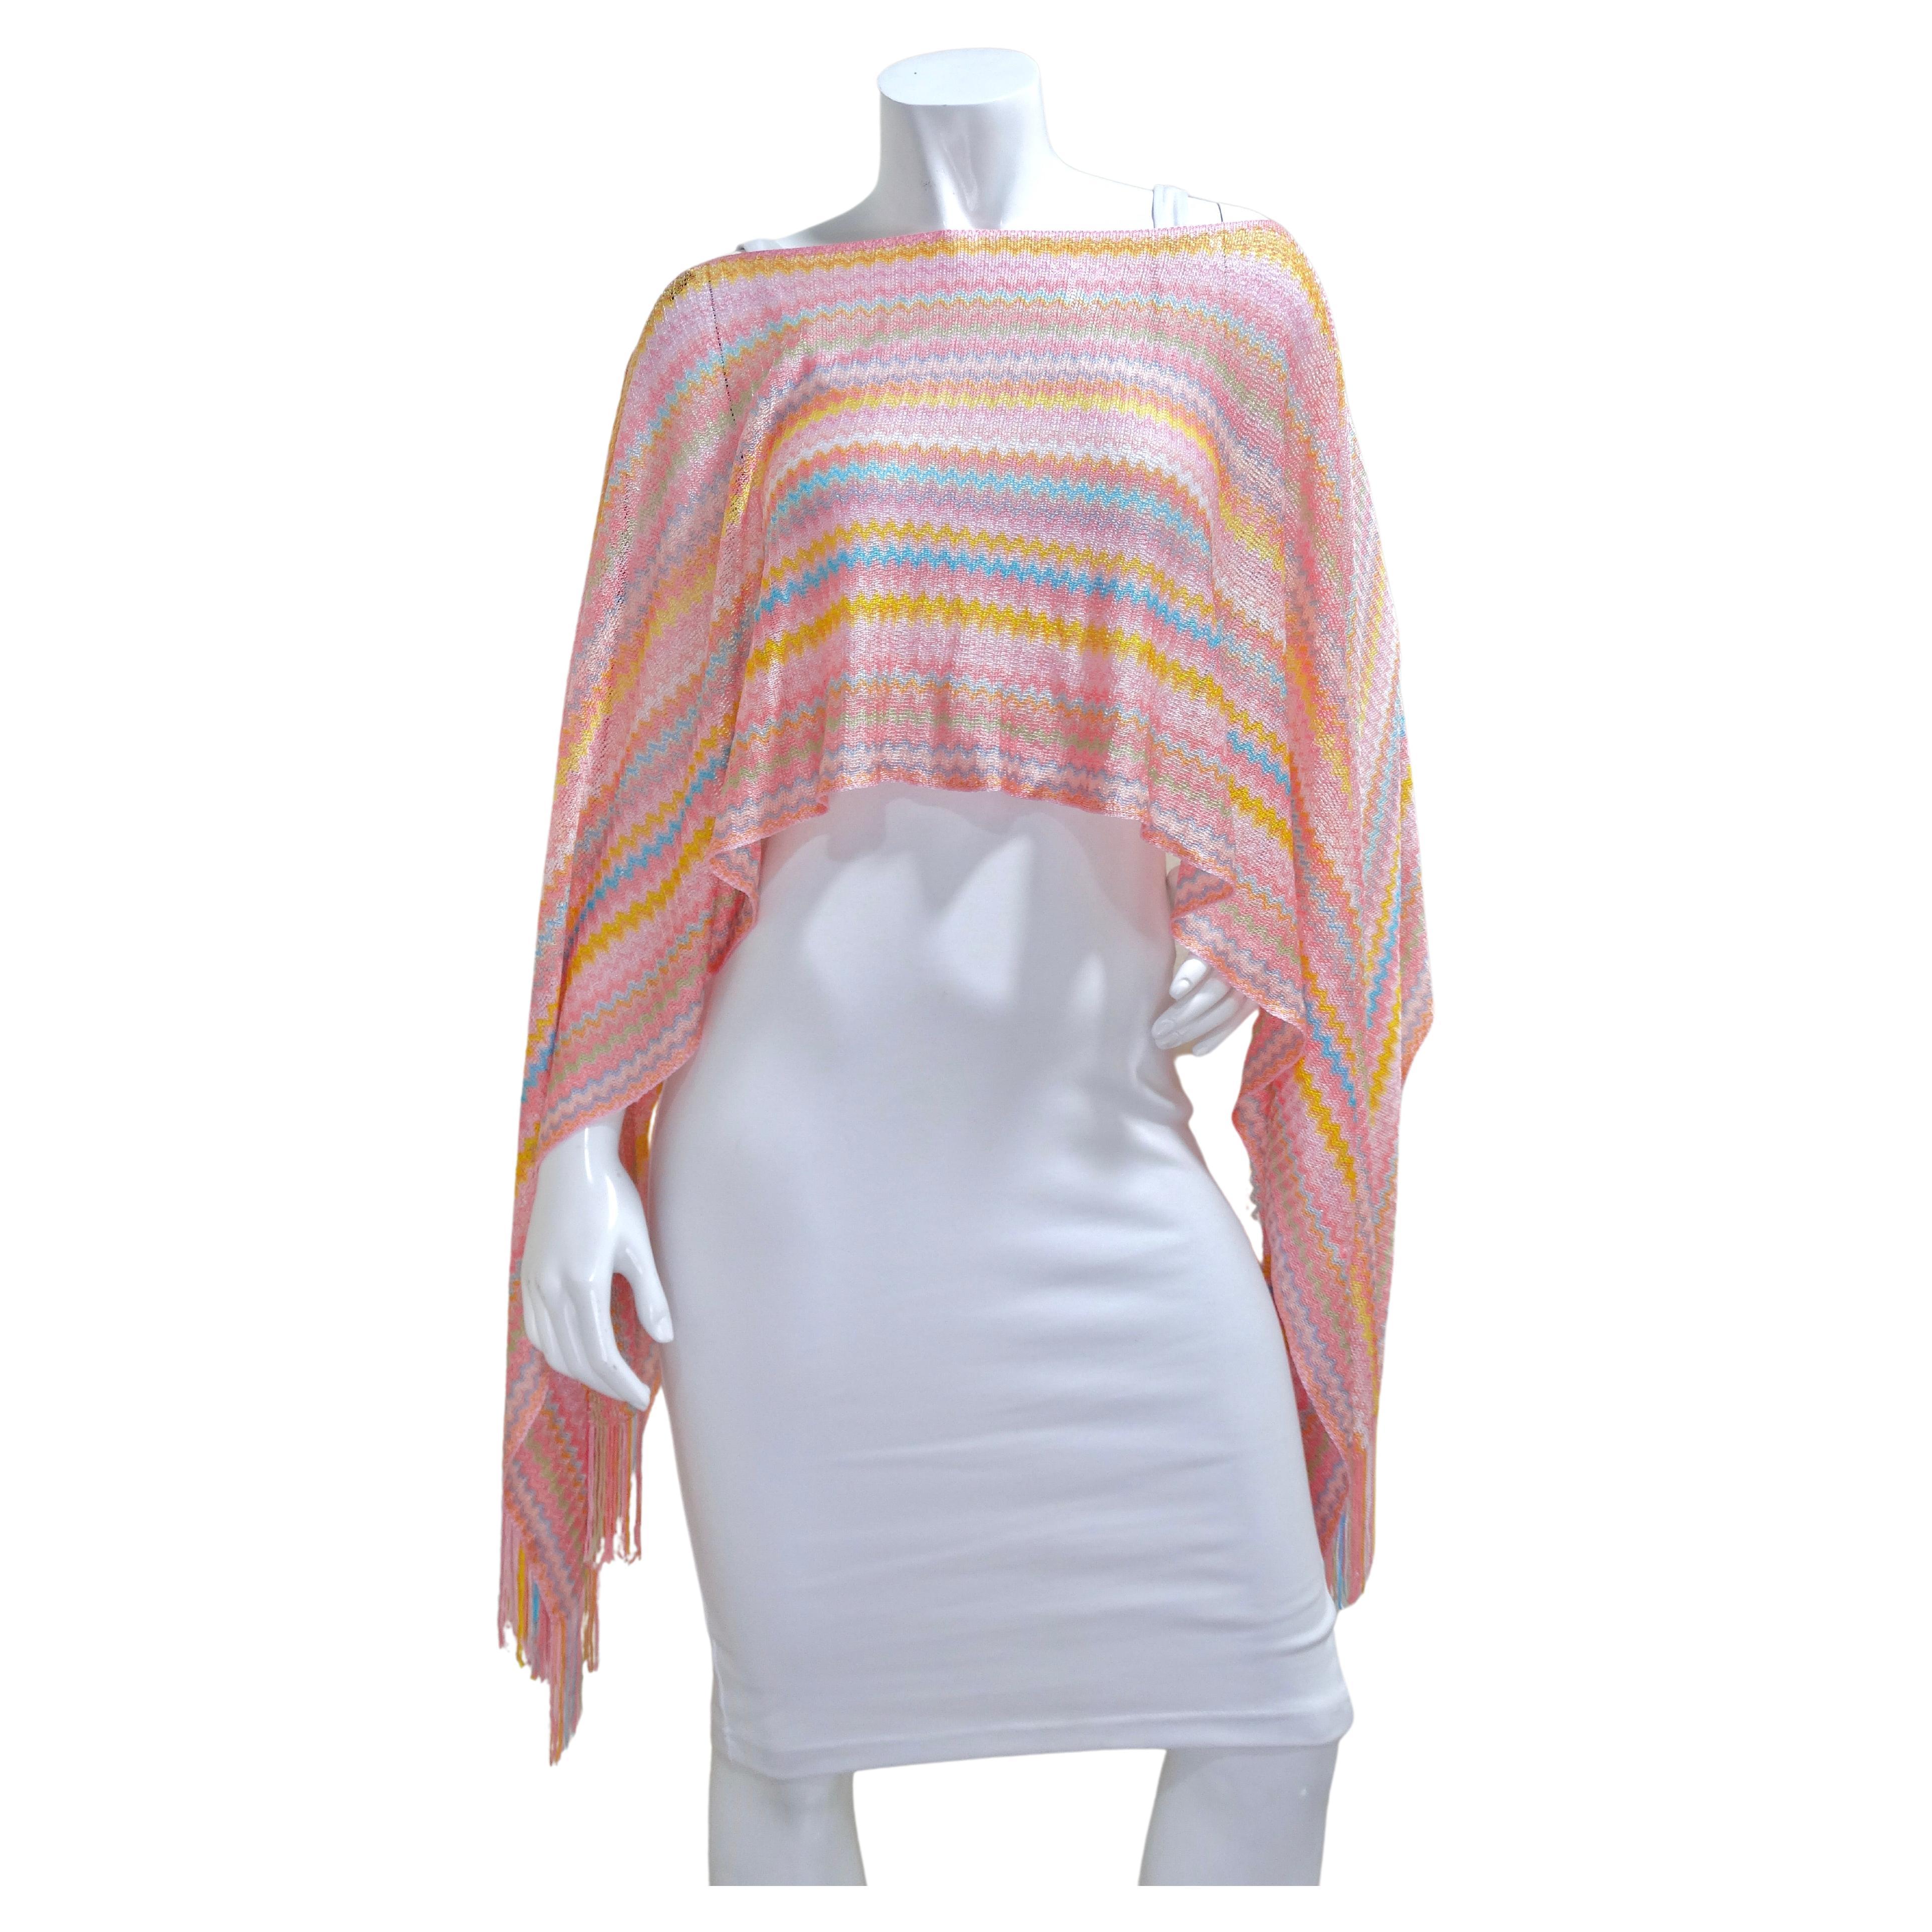 Missoni is known for their iconic and playful knits and this cropped poncho is an emblem of the brand. The cropped length gives a fresh take on a poncho and the fringe details adds a fun and flirty aspect. This top is versatile as it could be worn